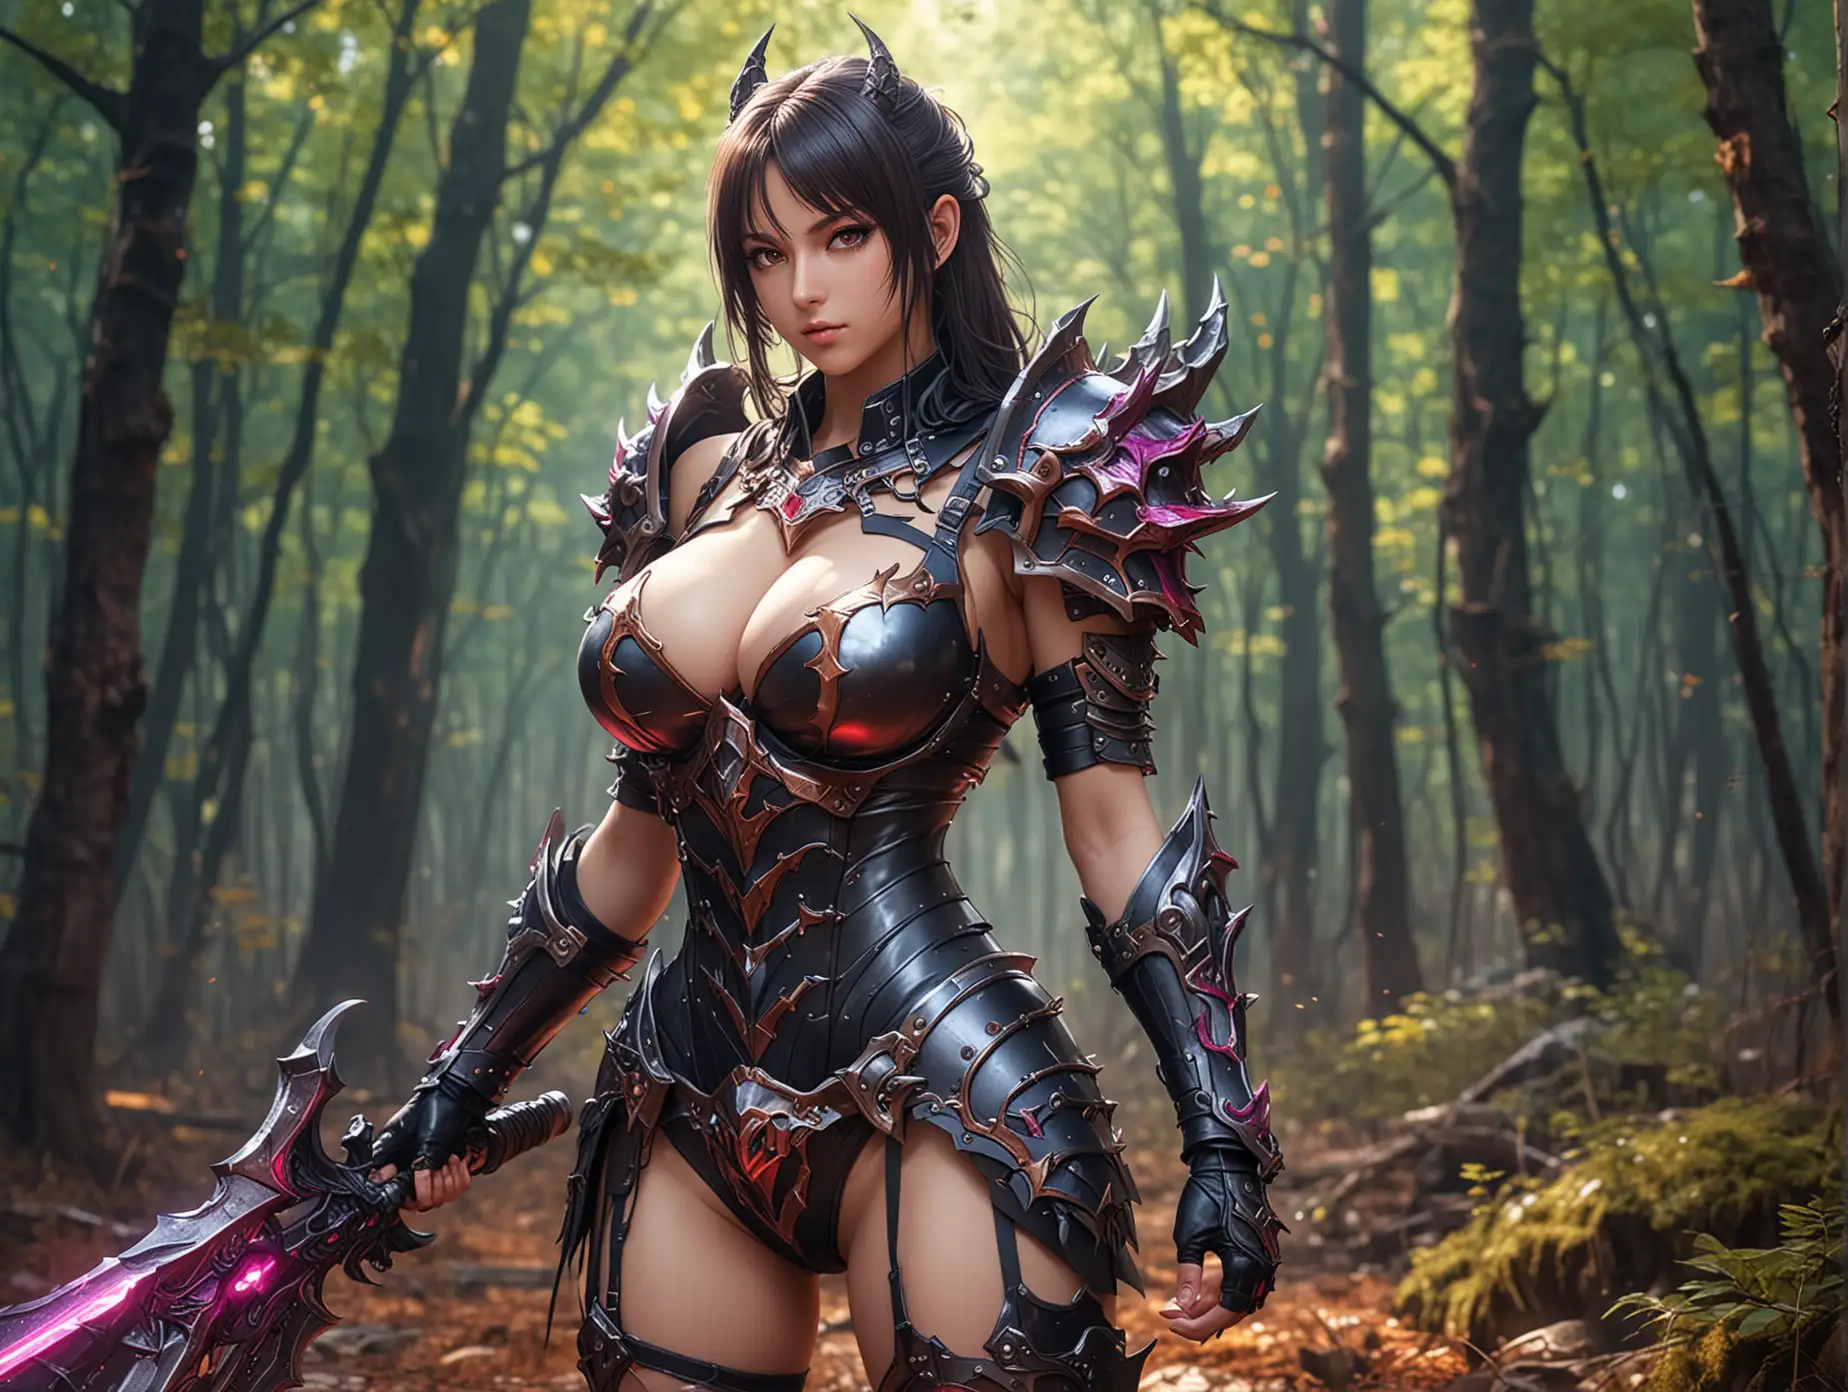 beautiful busty seductive anime demon girl, wearing sexy battle armor,  forest background, vibrant colors